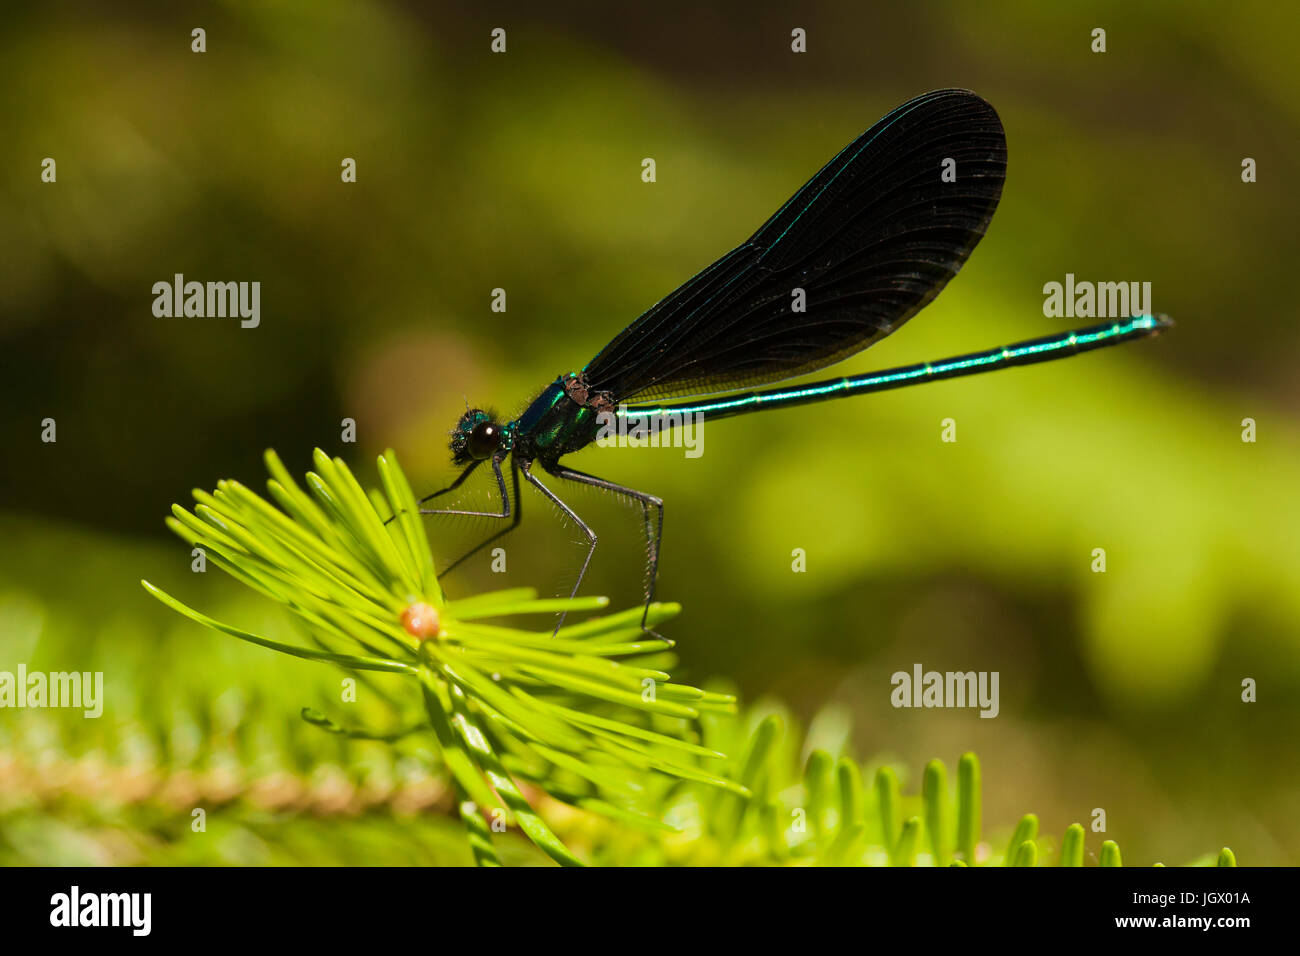 Male ebony jewelwing damselfly (Calopteryx maculata) resting on a fir branch. Black-winged damselfly isolated against a blurred background. Stock Photo